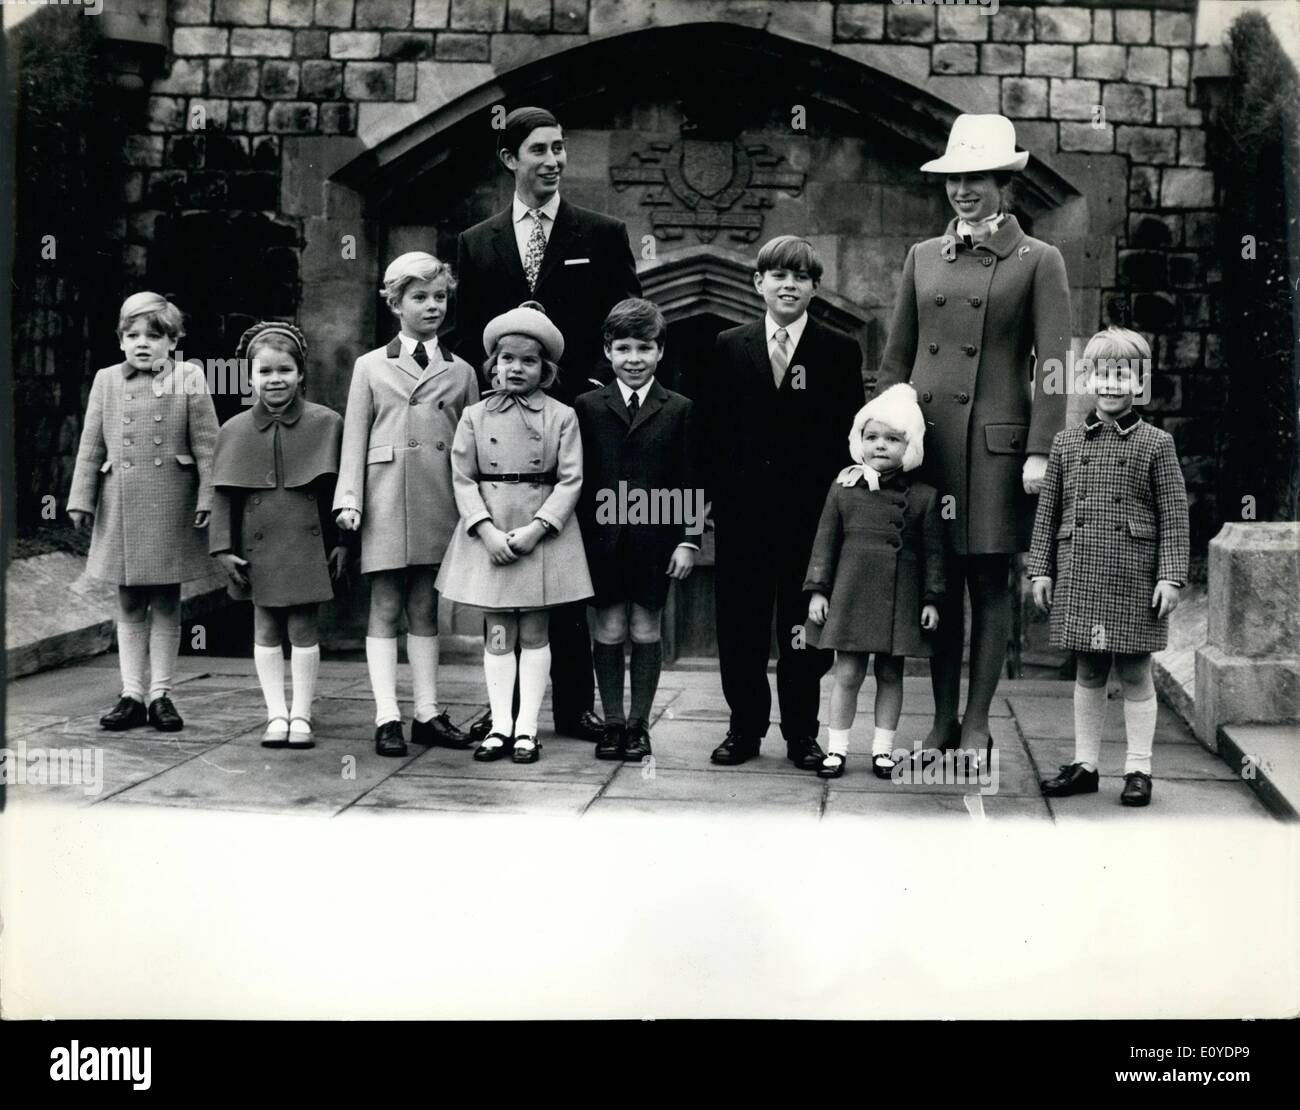 Dec. 12, 1969 - The Royal Children At Windsor. Photo shows The Prince of Wales and Princess Anne standing with the other Royal children on the East Terrace at Windsor Castle after they had attended morning service on Christmas Day at St. George's Chapel. The children are (L. to R.) James Ogilvy, 5, son of Princess Alexandra and Mr. Angus Ogilvy; Lady Sarah Armstrong-Jones, 5, daughter of Princess Margaret and the Earl of Snowdon; the Earl of St Stock Photo